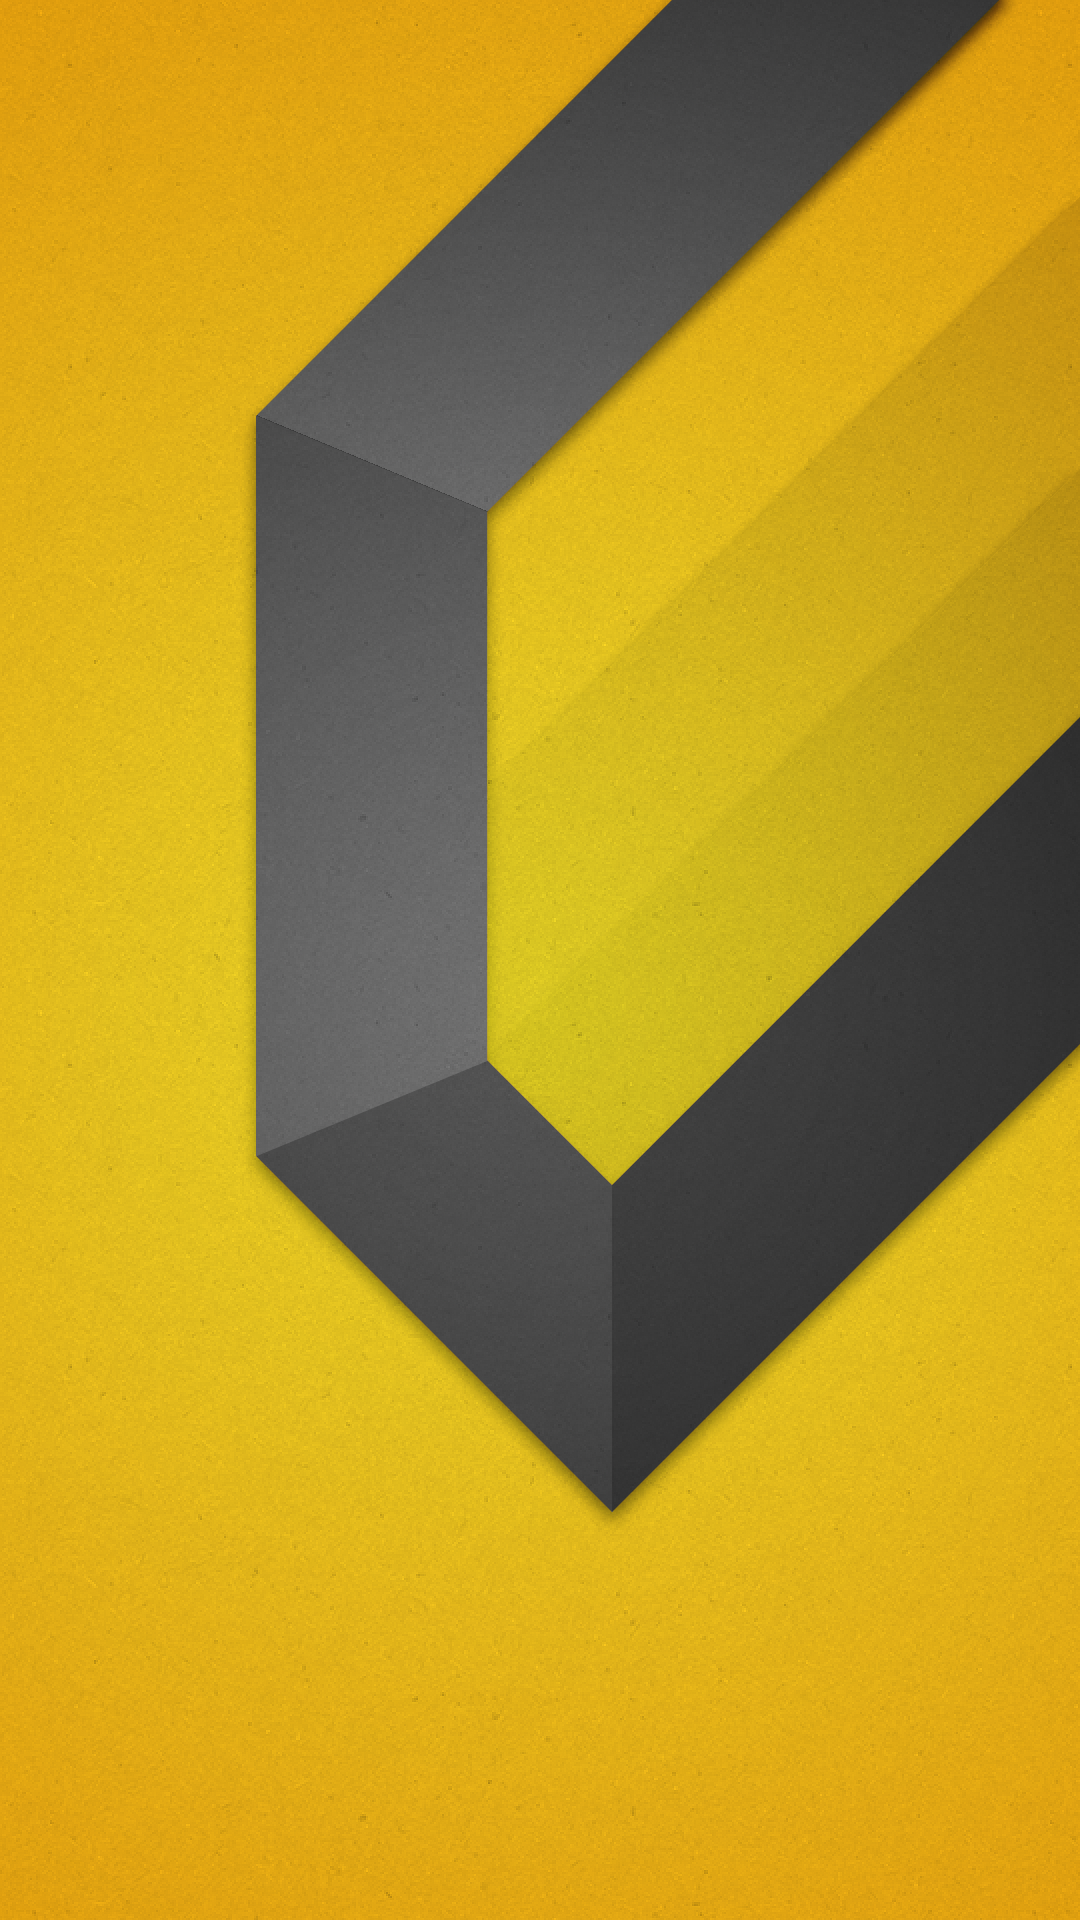 android marshmallow wallpaper 1080p,yellow,rectangle,material property,font,square